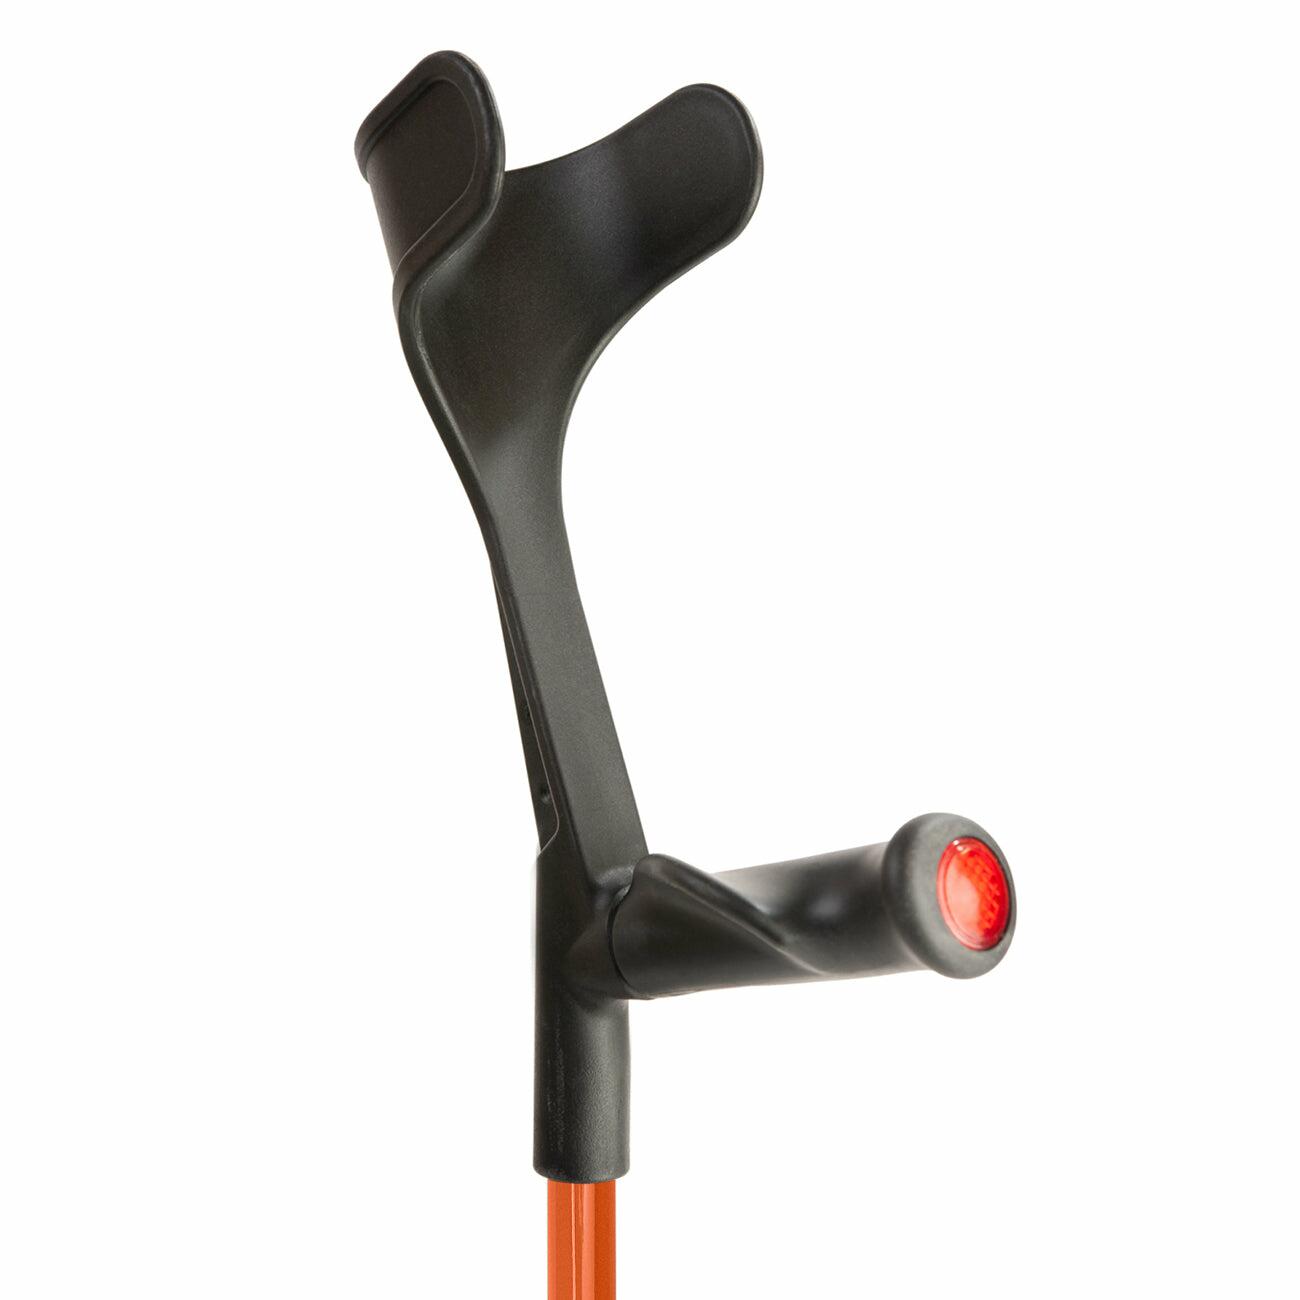 Comfort grip handle and open cuff of an orange Flexyfoot Comfort Grip Open Cuff Crutch